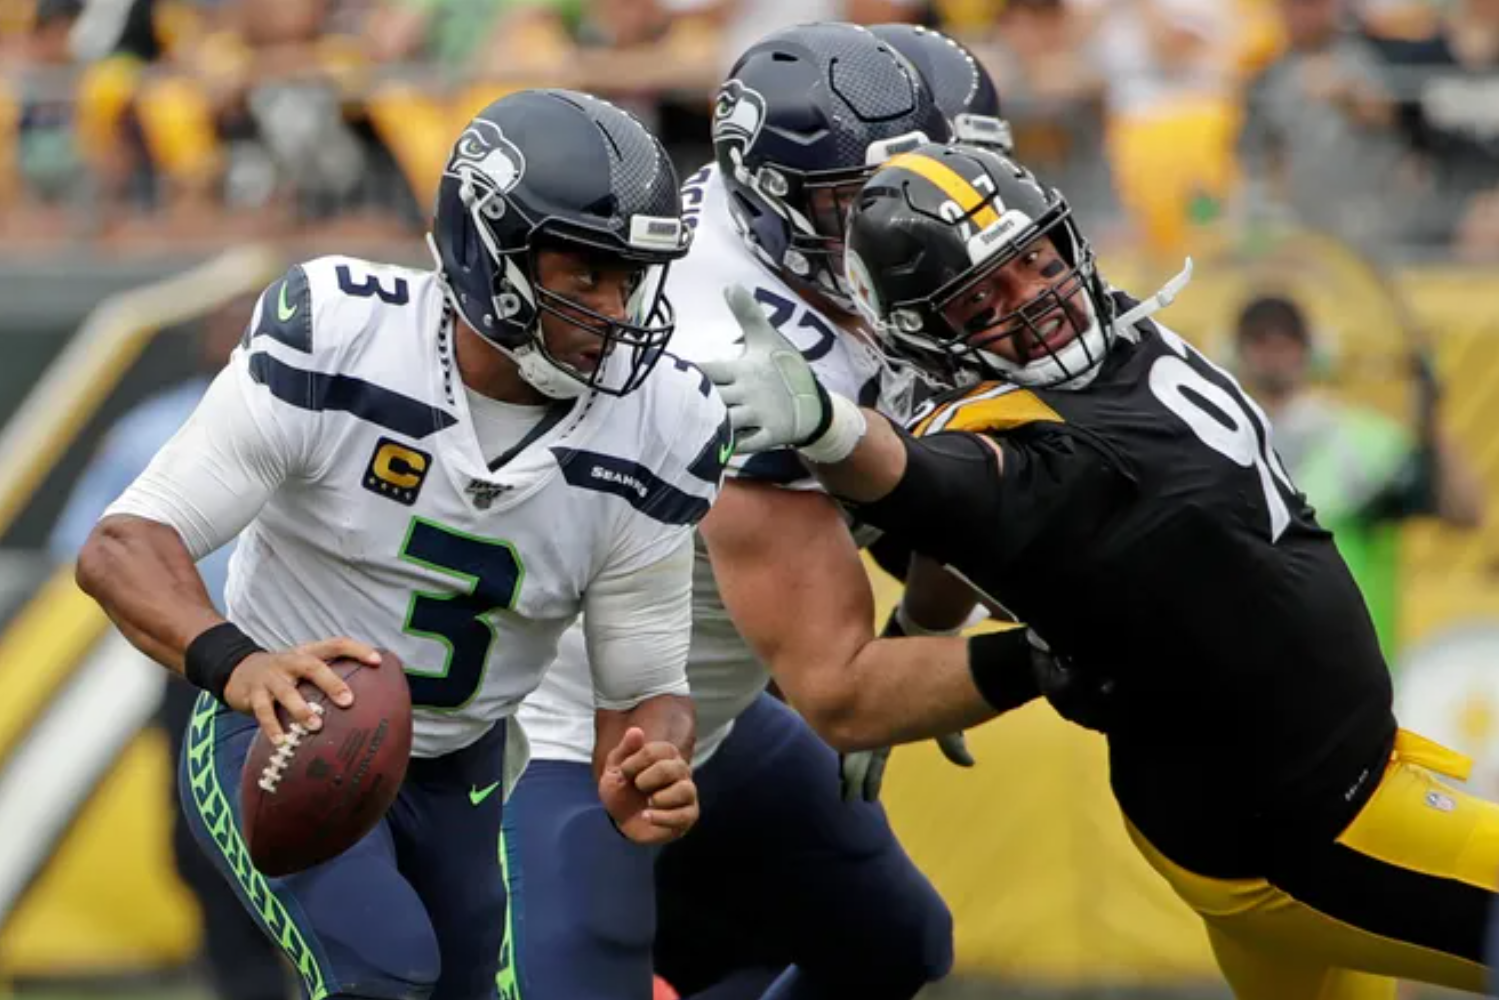 Steelers Likely To Sign Russell Wilson According To A "Little Birdie" Detailed Chad "Ochocinco" Johnson